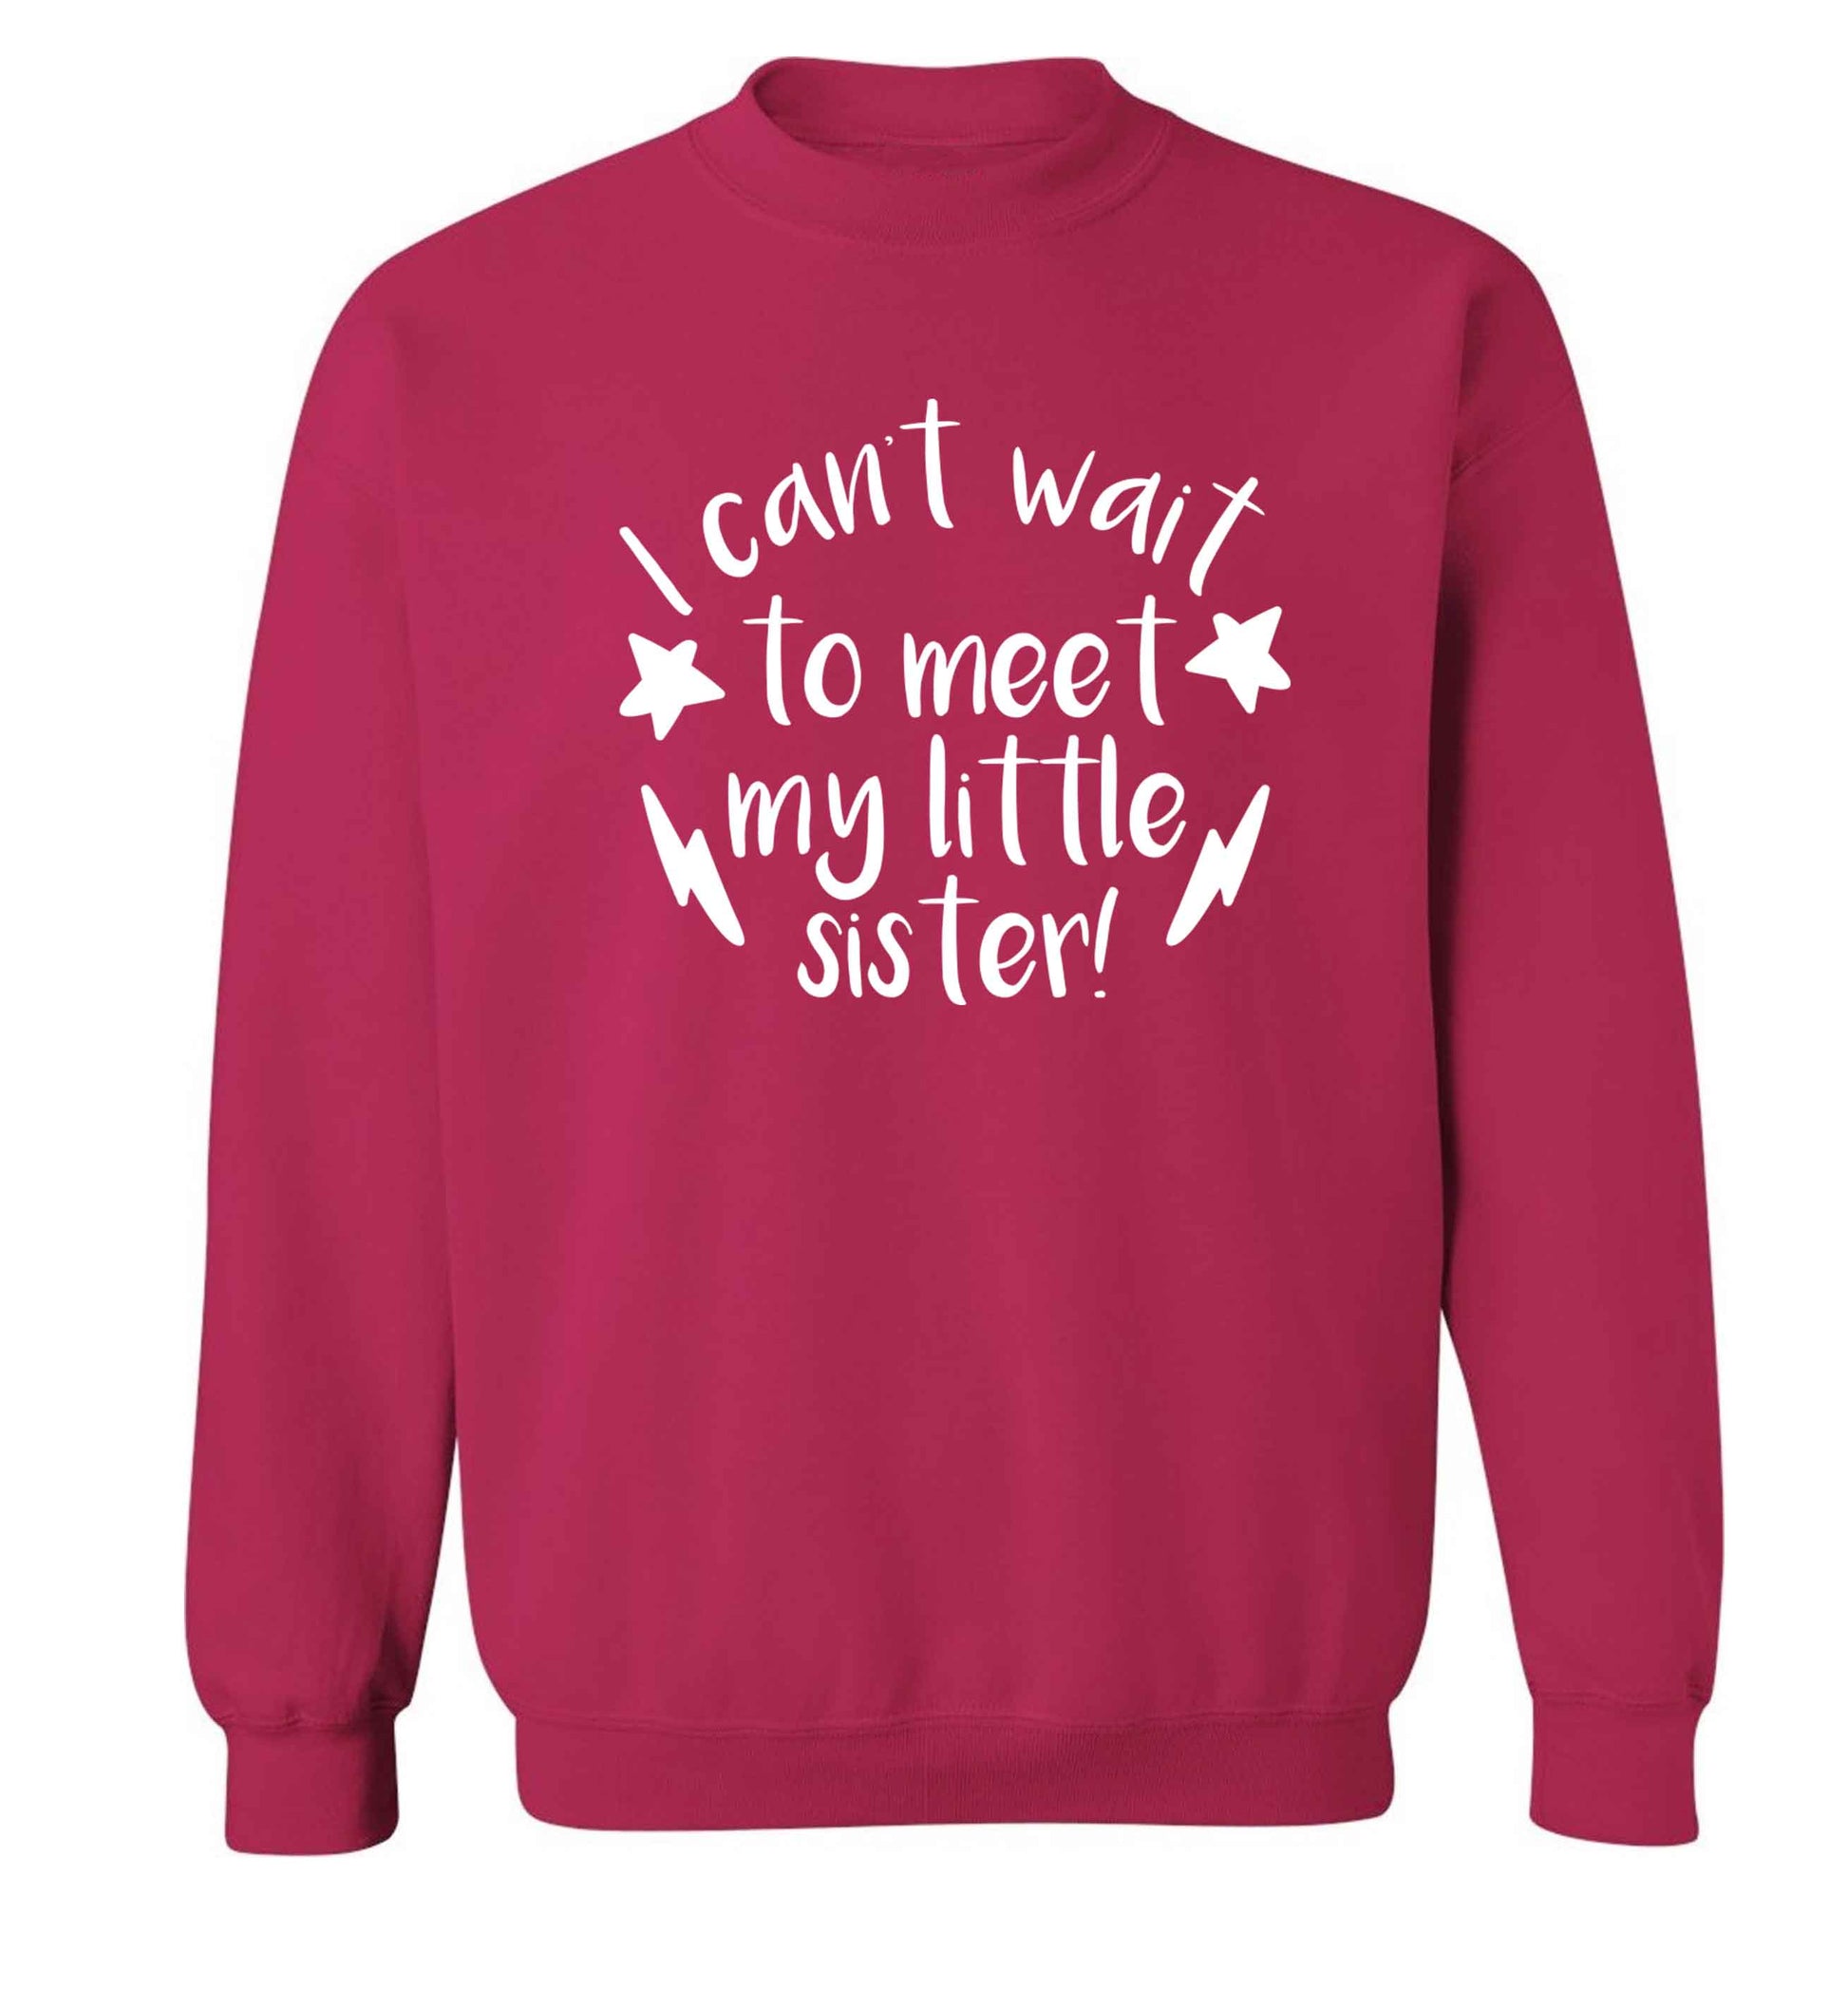 Something special growing inside it's my little sister I can't wait to say hi! Adult's unisex pink Sweater 2XL